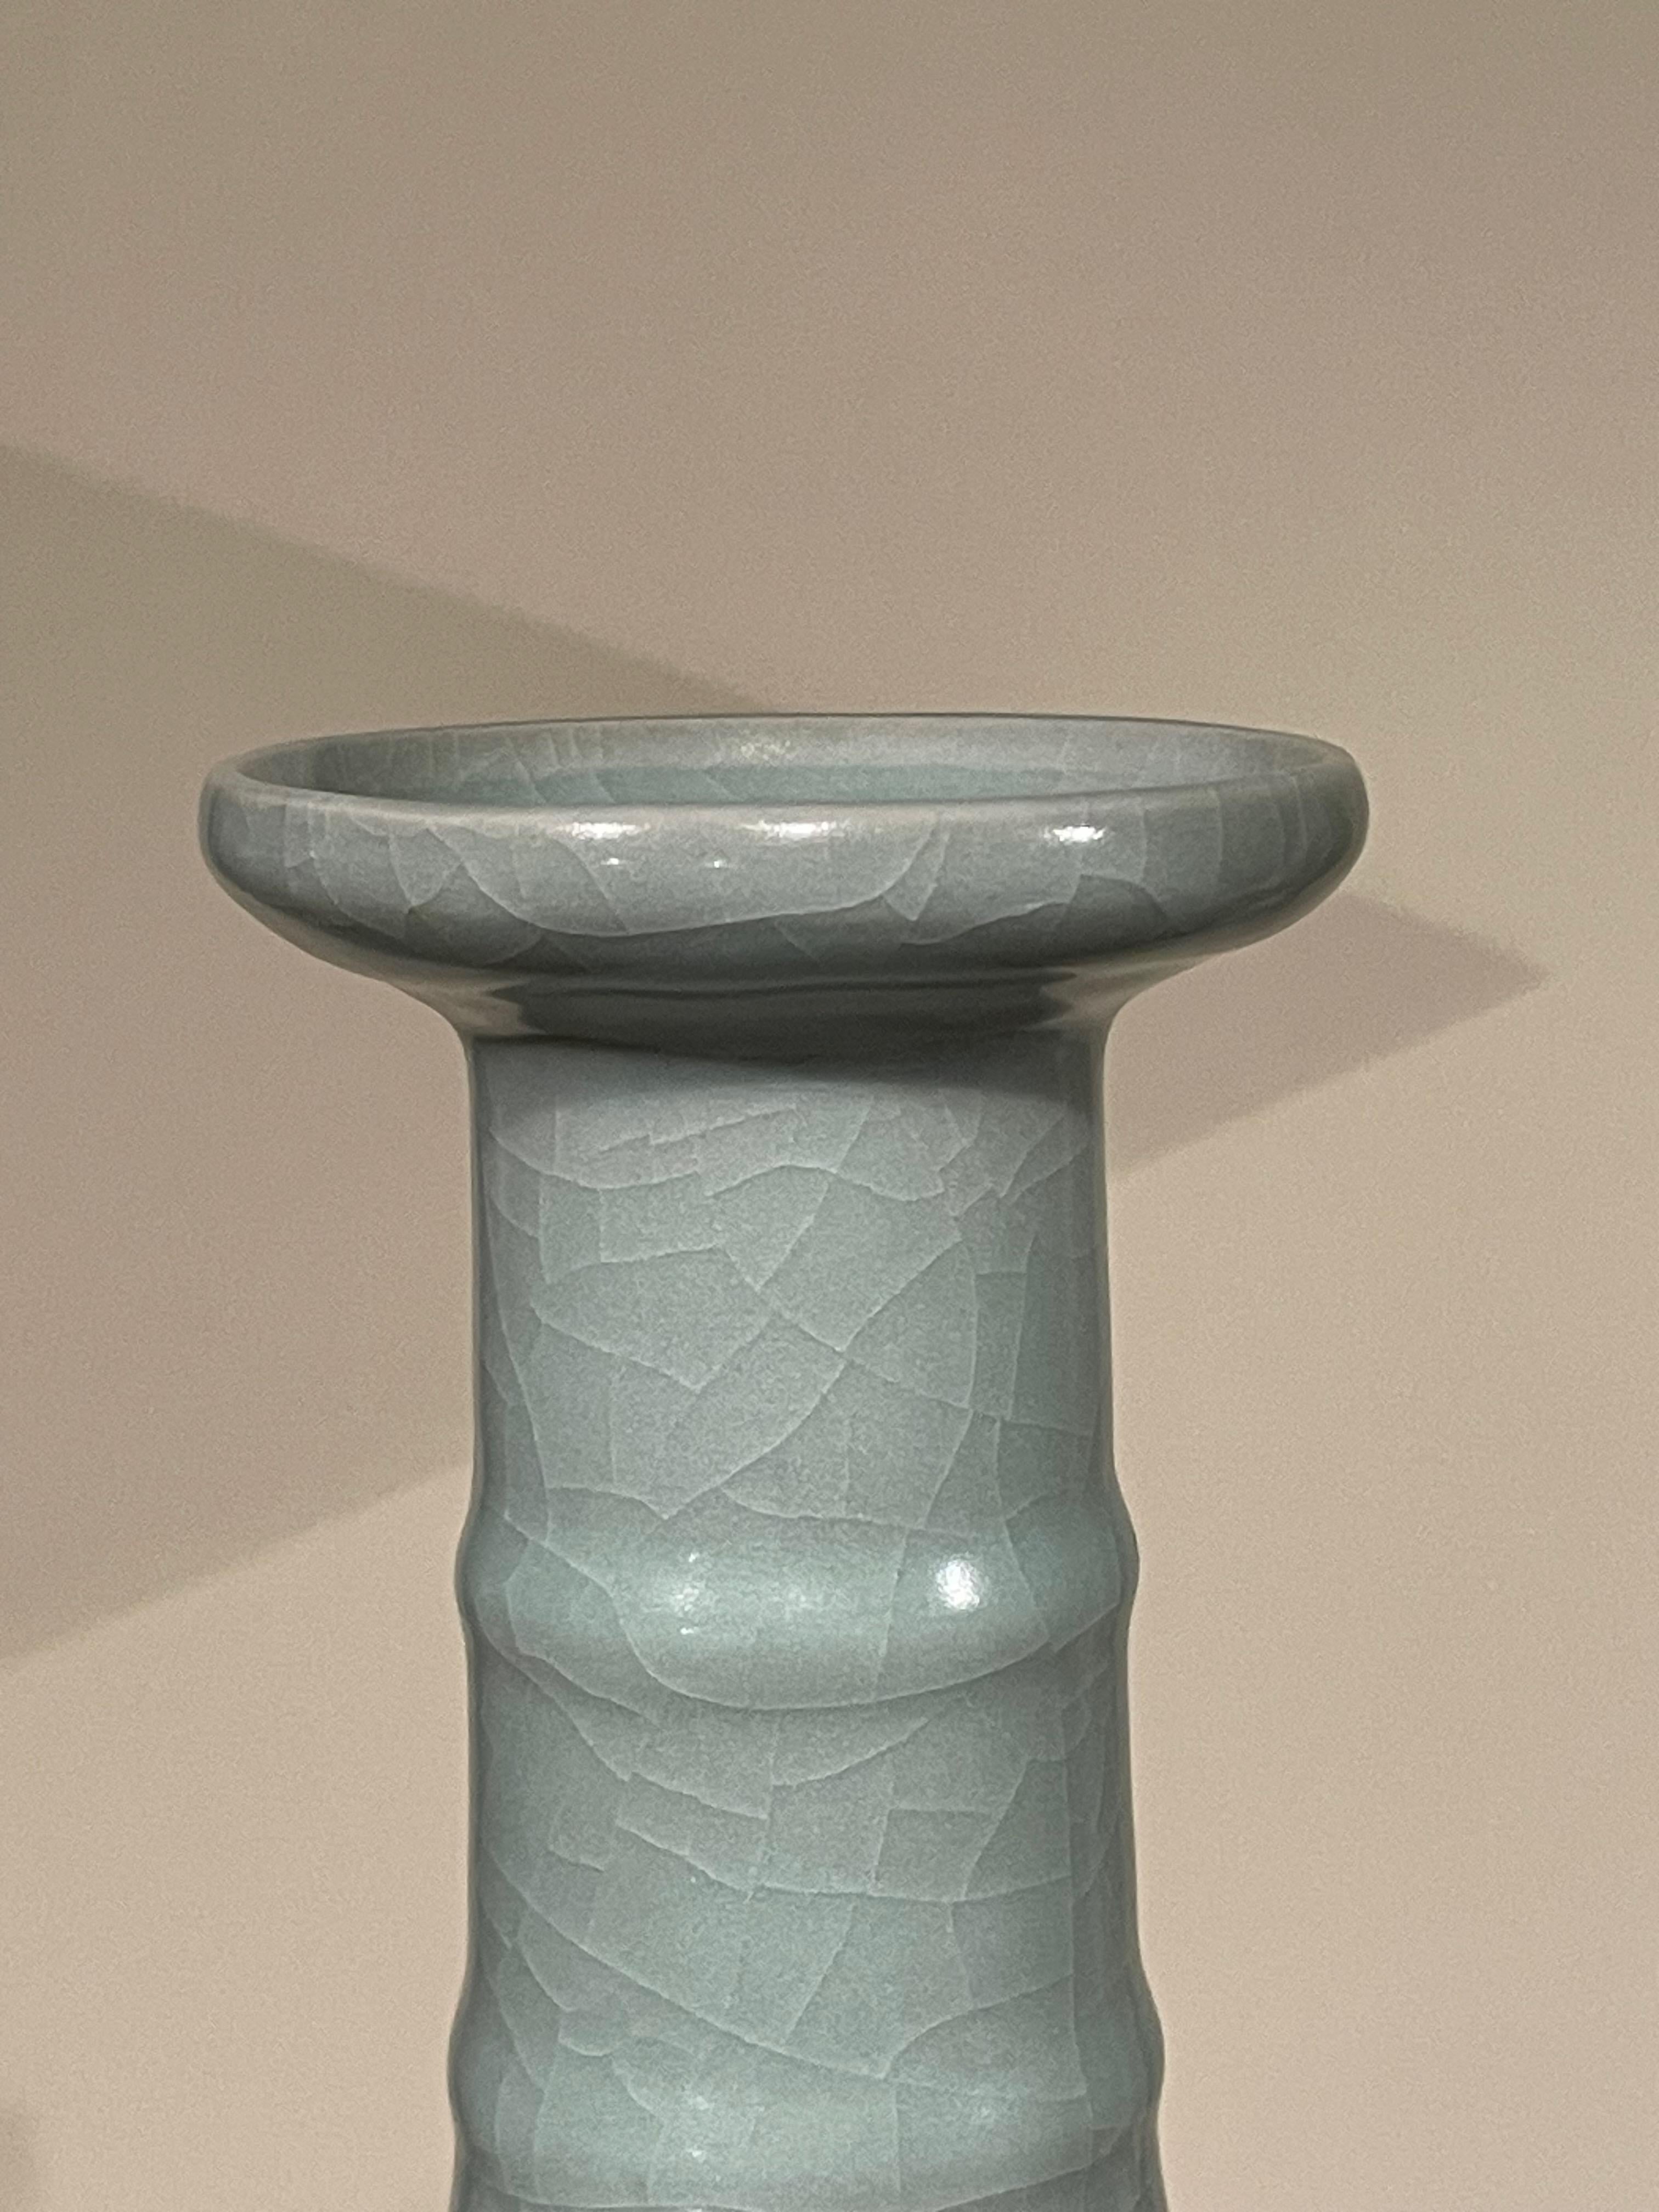 Contemporary Chinese pale turquoise vase.
Tall neck with horizontal rib details.
Large collection available with varying sizes and shapes.
ARRIVING APRIL